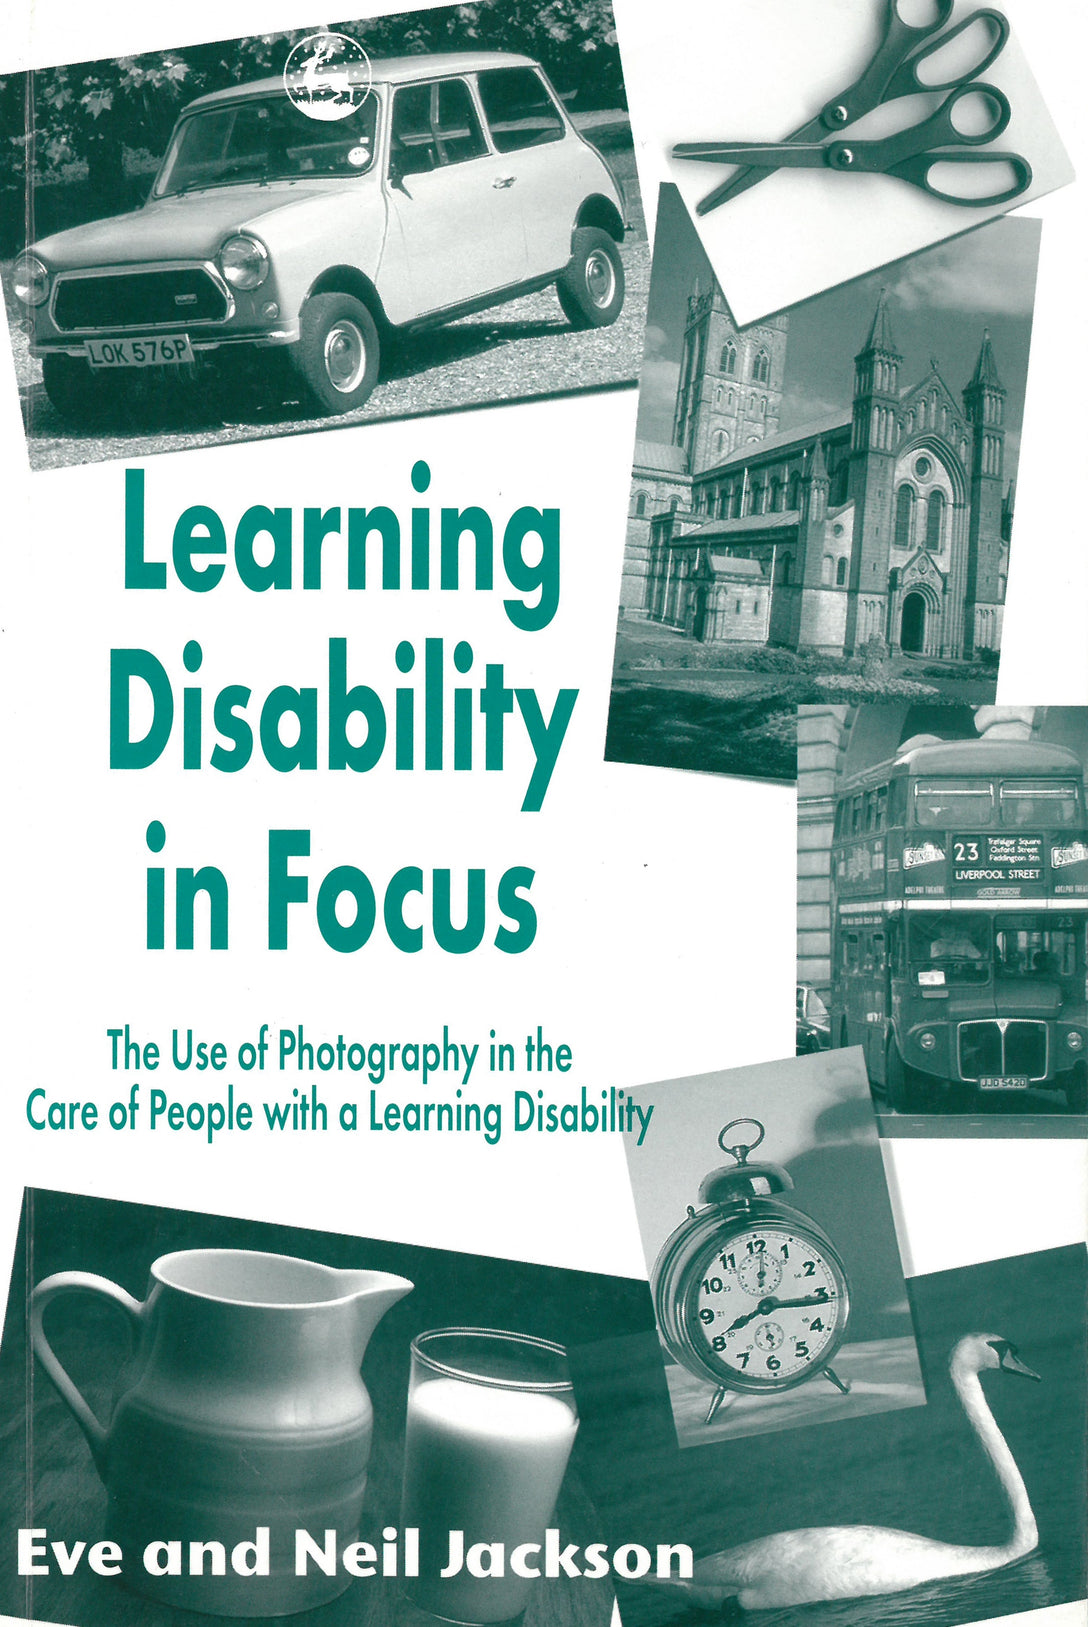 Learning Disability in Focus by Eve Jackson, Neil Jackson